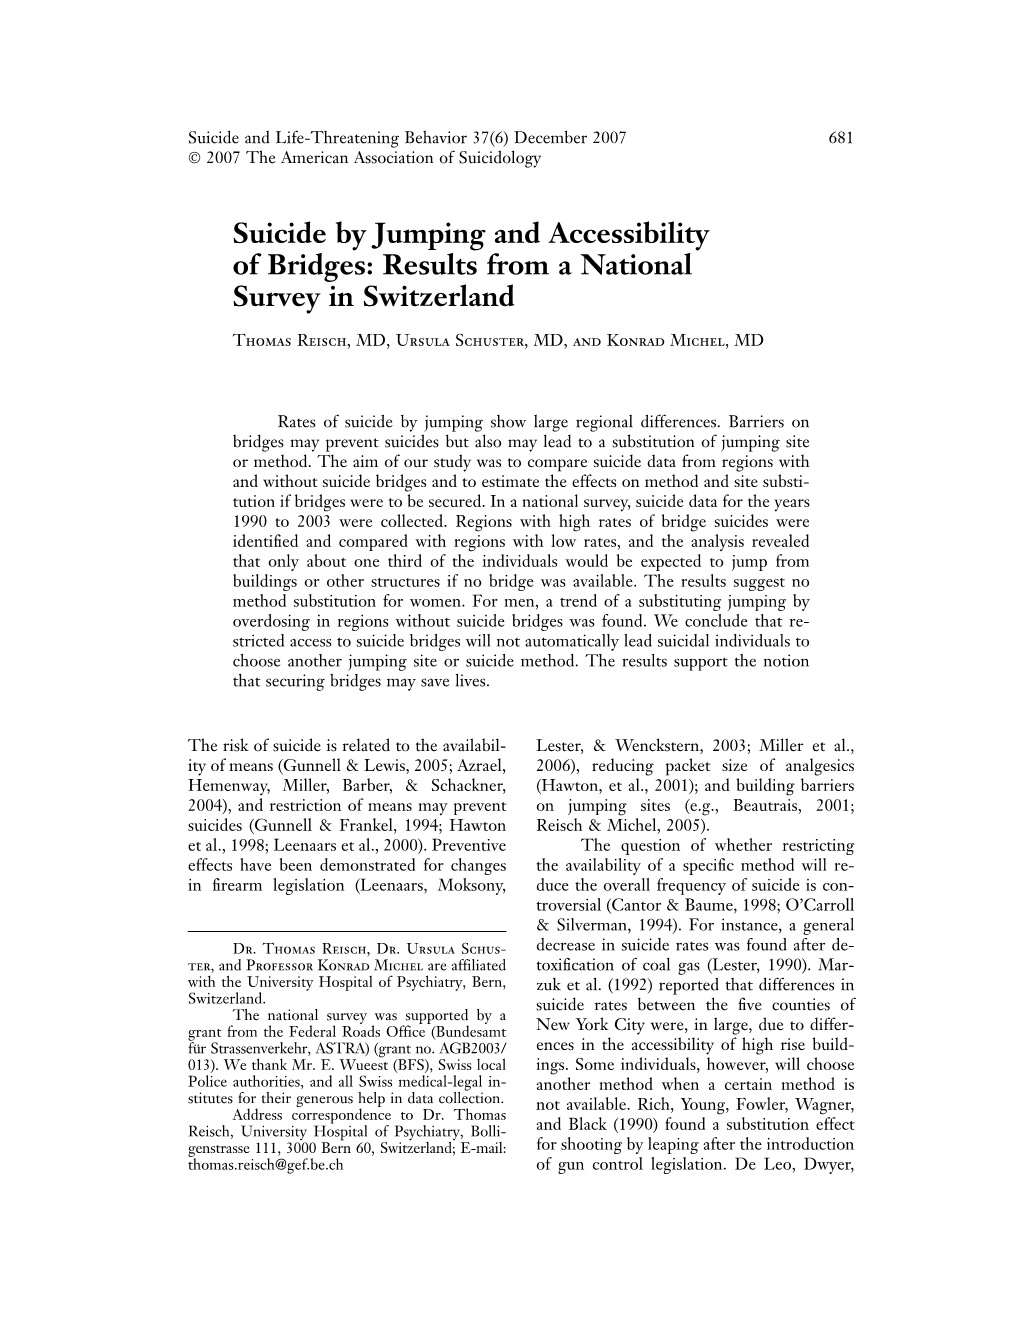 Suicide by Jumping and Accessibility of Bridges: Results from a National Survey in Switzerland